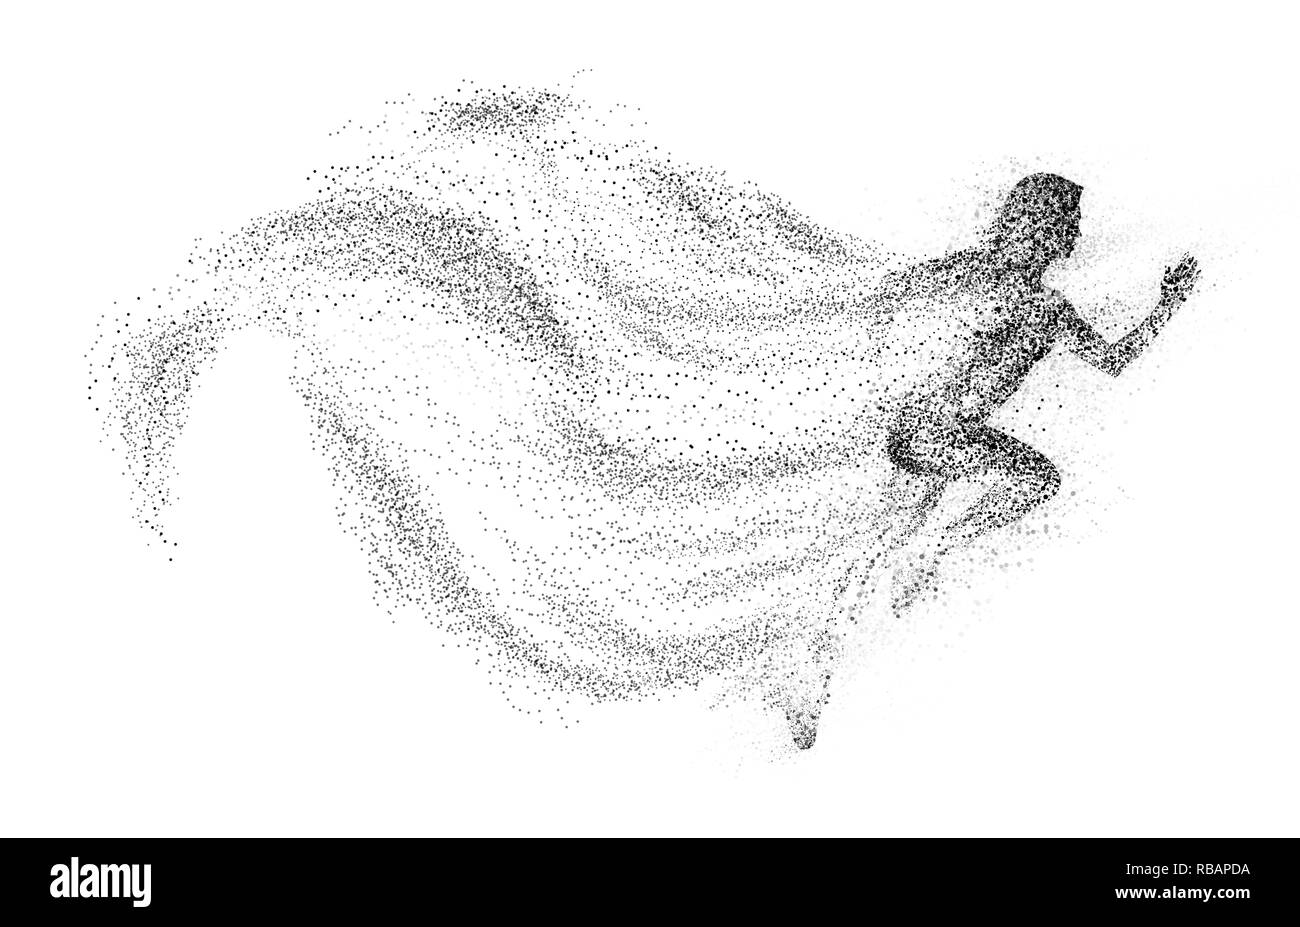 Black silhouette of running woman from particle divergent. Isolated on white background. Stock Photo